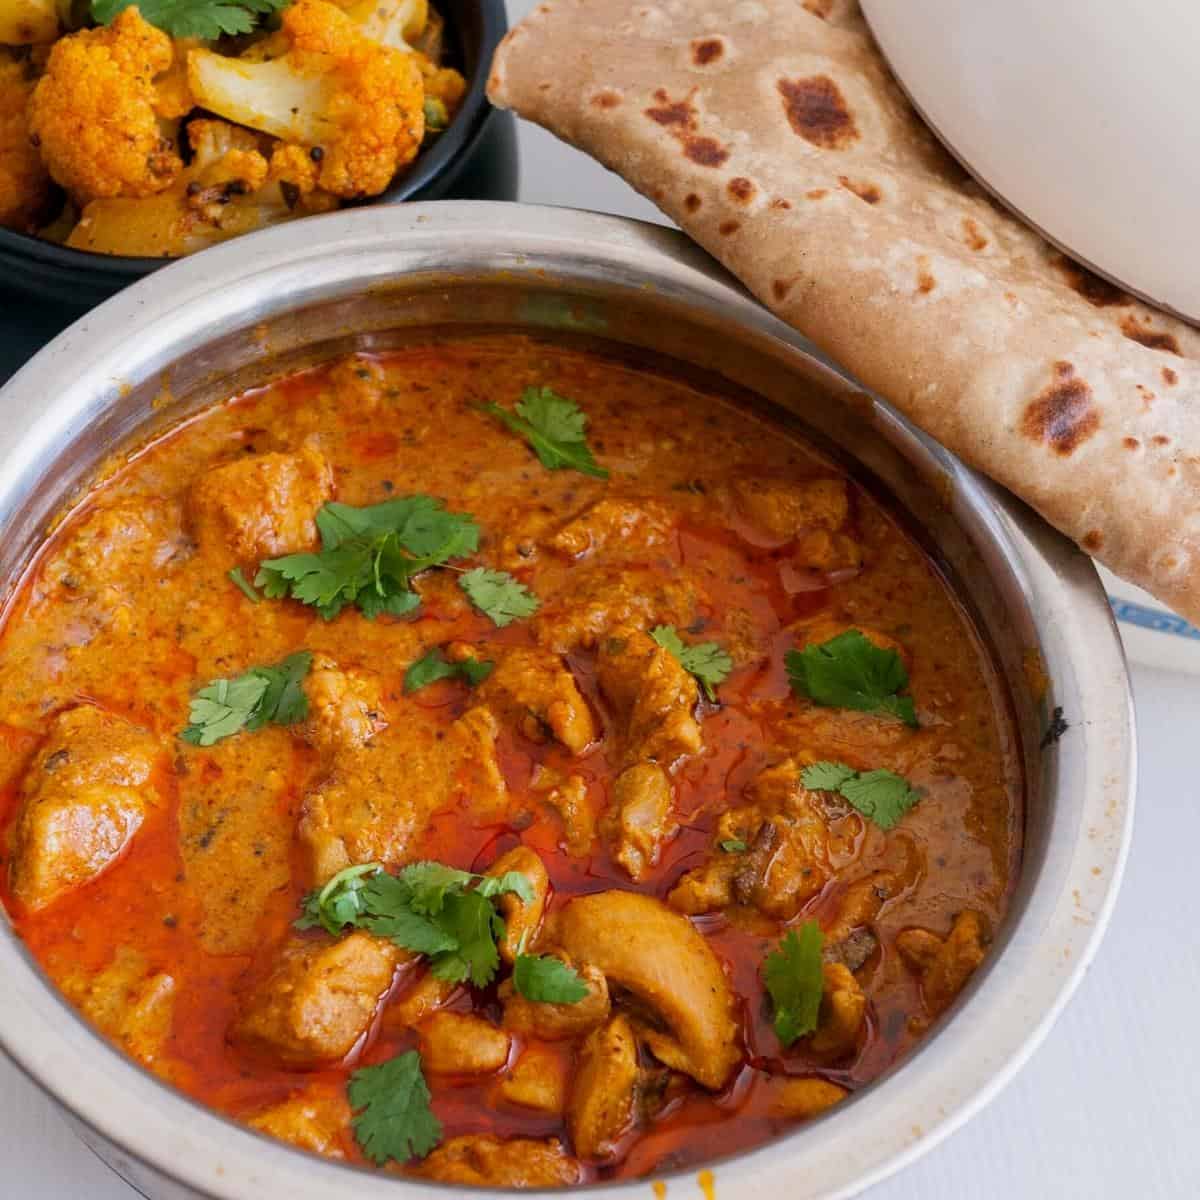 Chicken curry in a pot with chapati on the side.